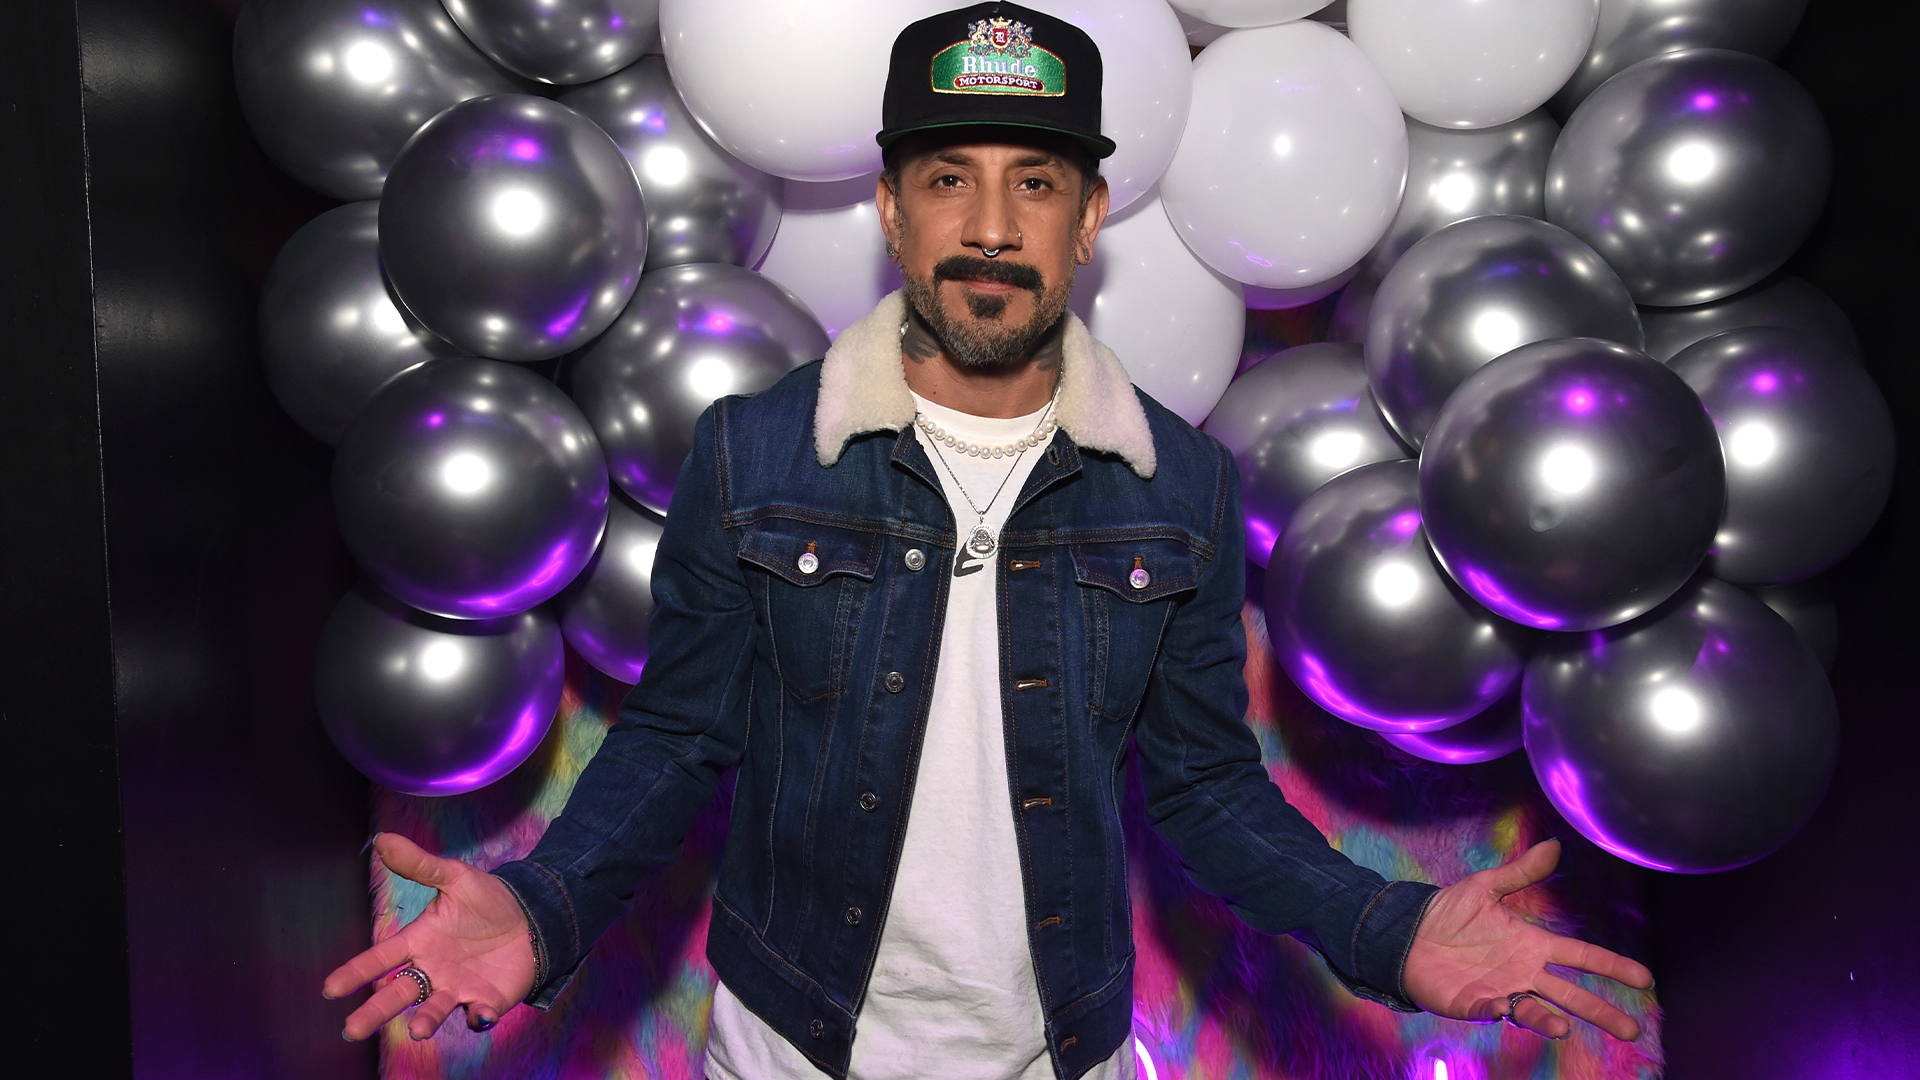 AJ McLean on X: It's September 1st which means it's basically fall aka the  best season for golf! Shop bold and comfy golf apparel at   🐐 Let's go!!  / X